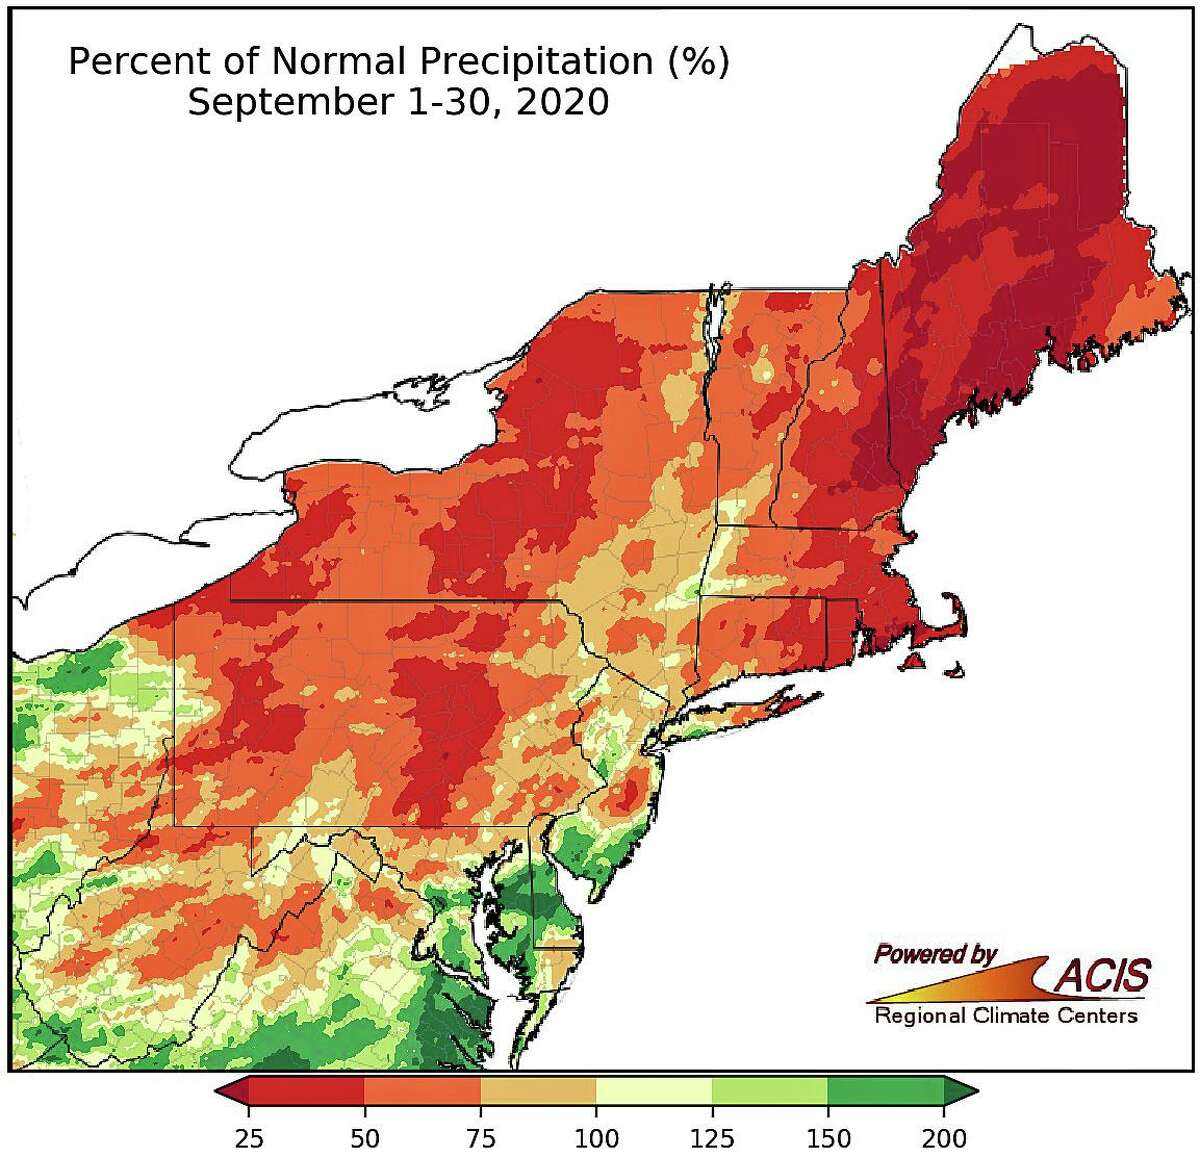 September precipitation ranged from less than 25 percent of normal to near normal for a majority of the Northeast.